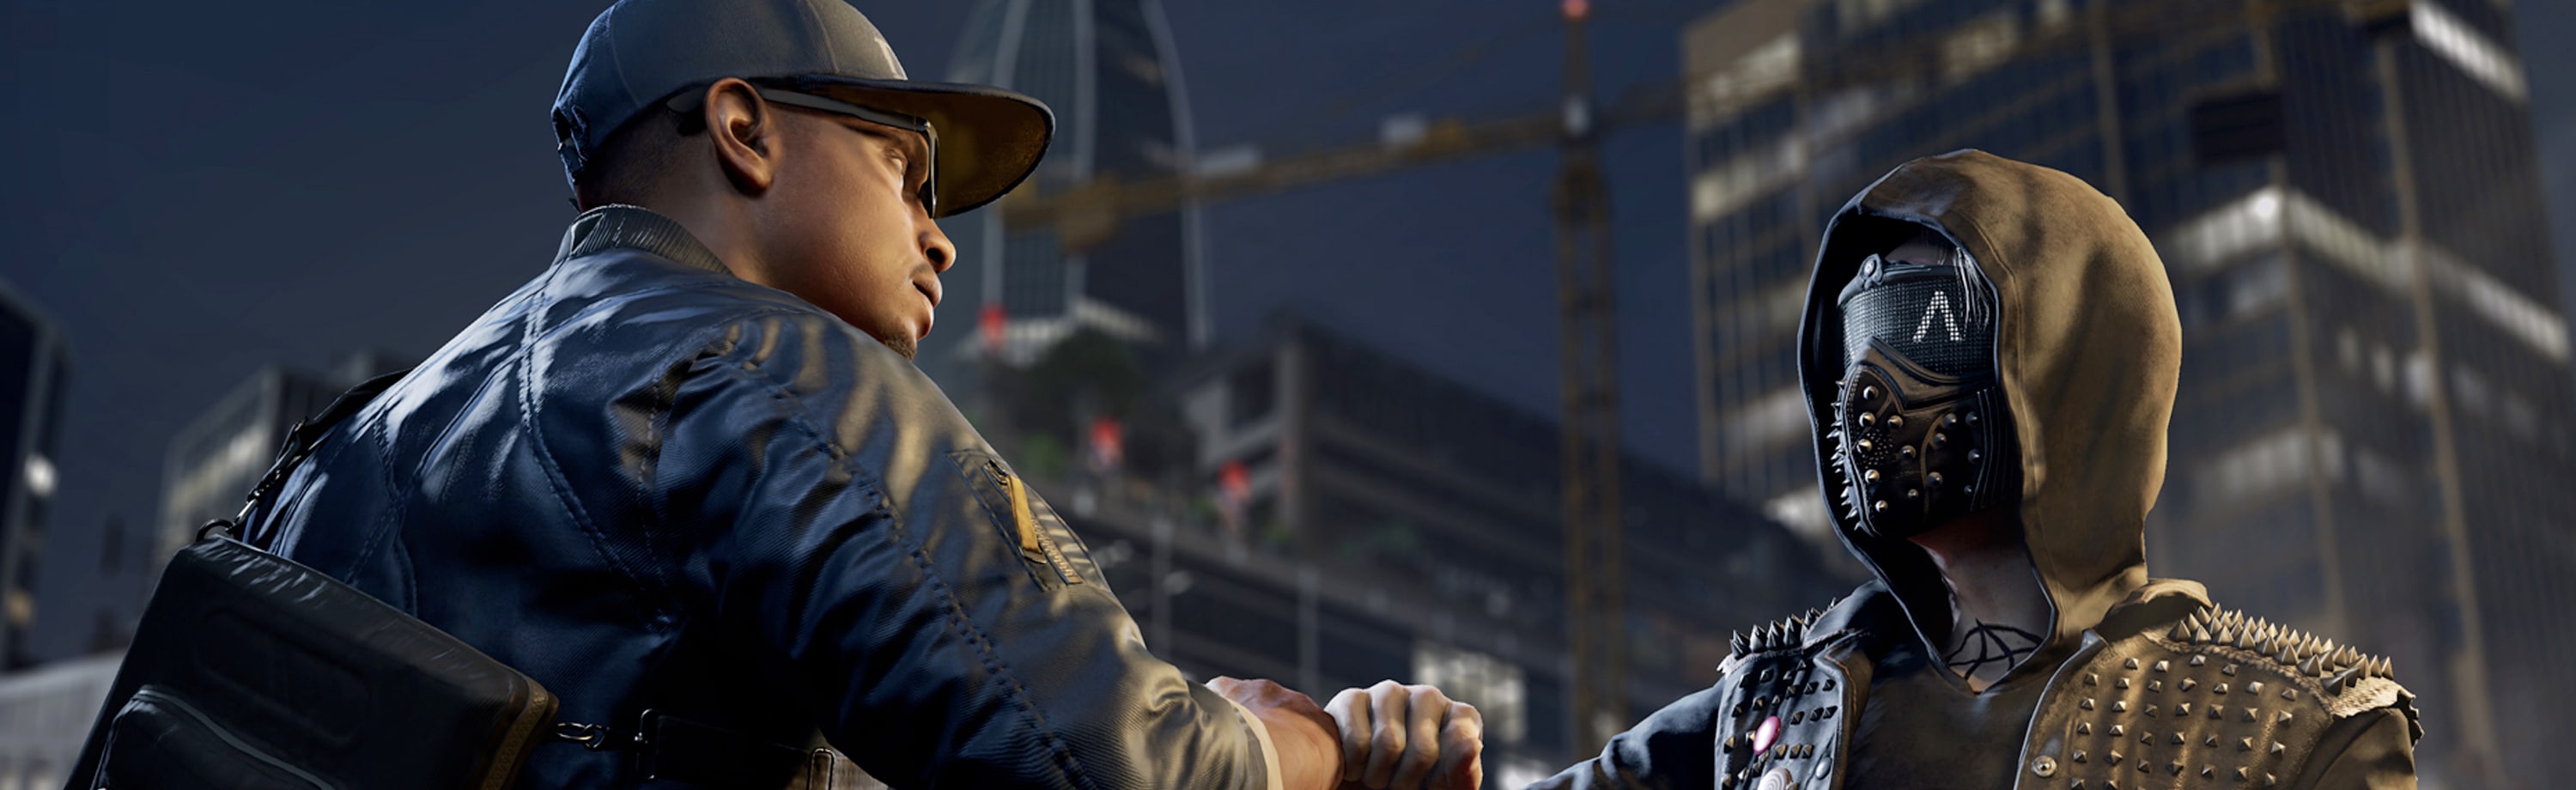 Marcus from Watch Dogs 2